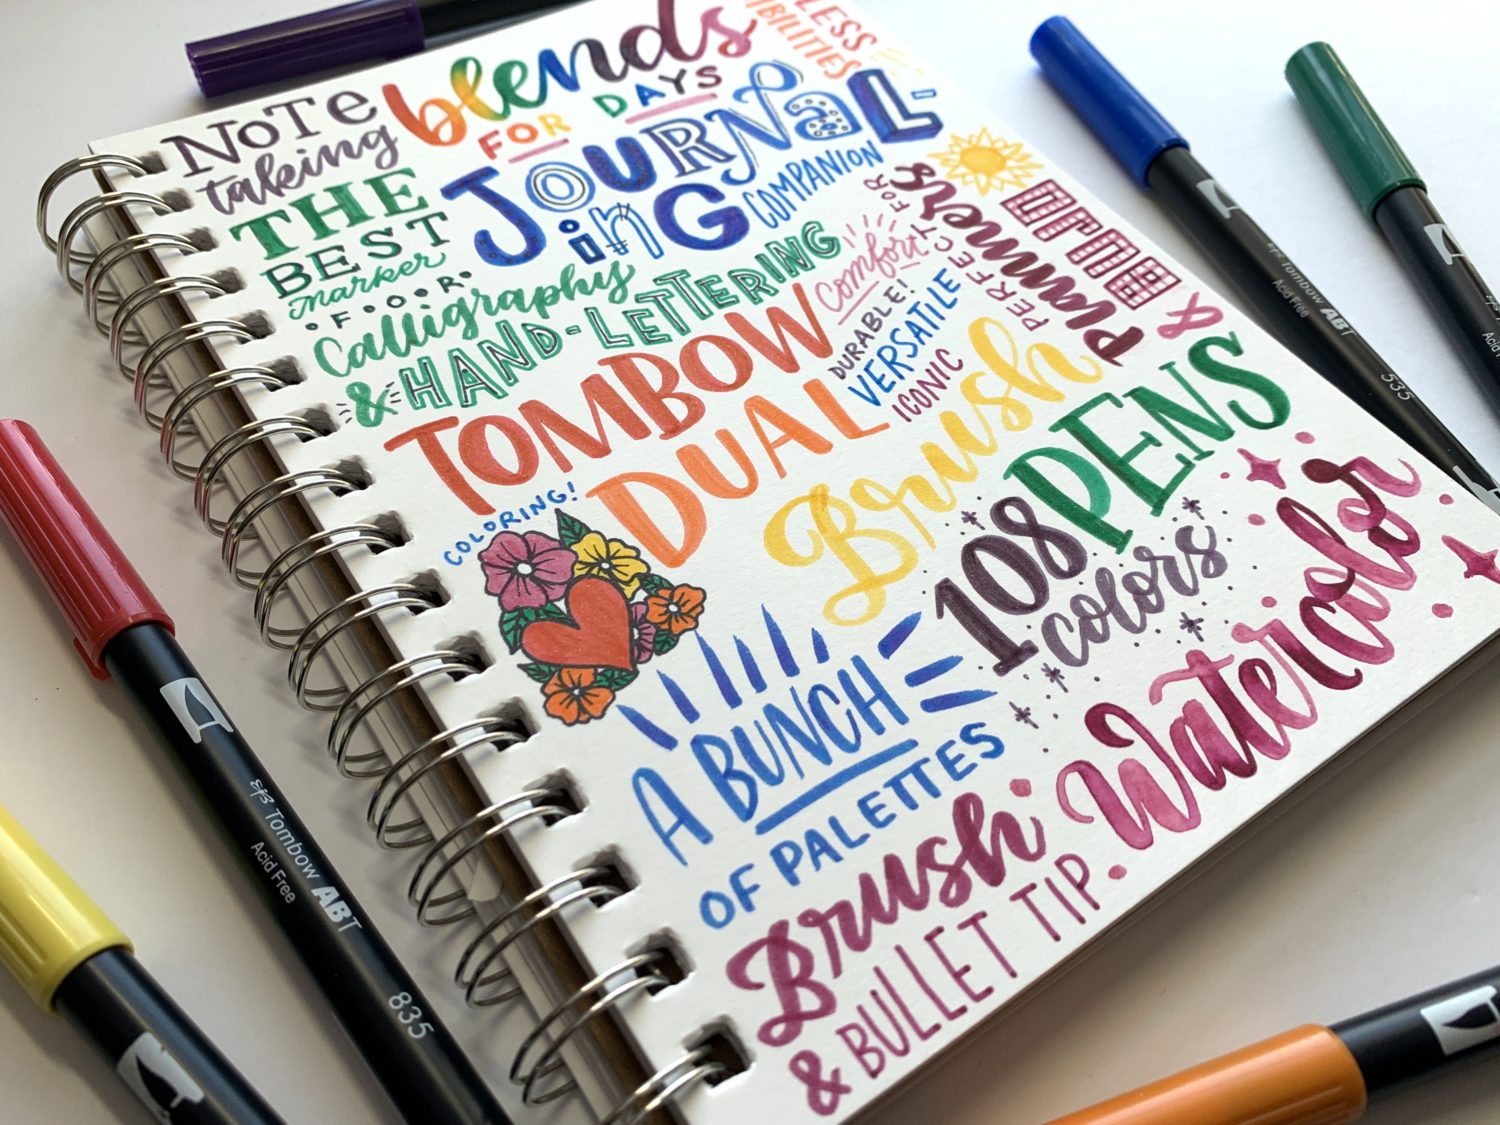 Everything You Need to Know About Dual Brush Pens - Tombow USA Blog